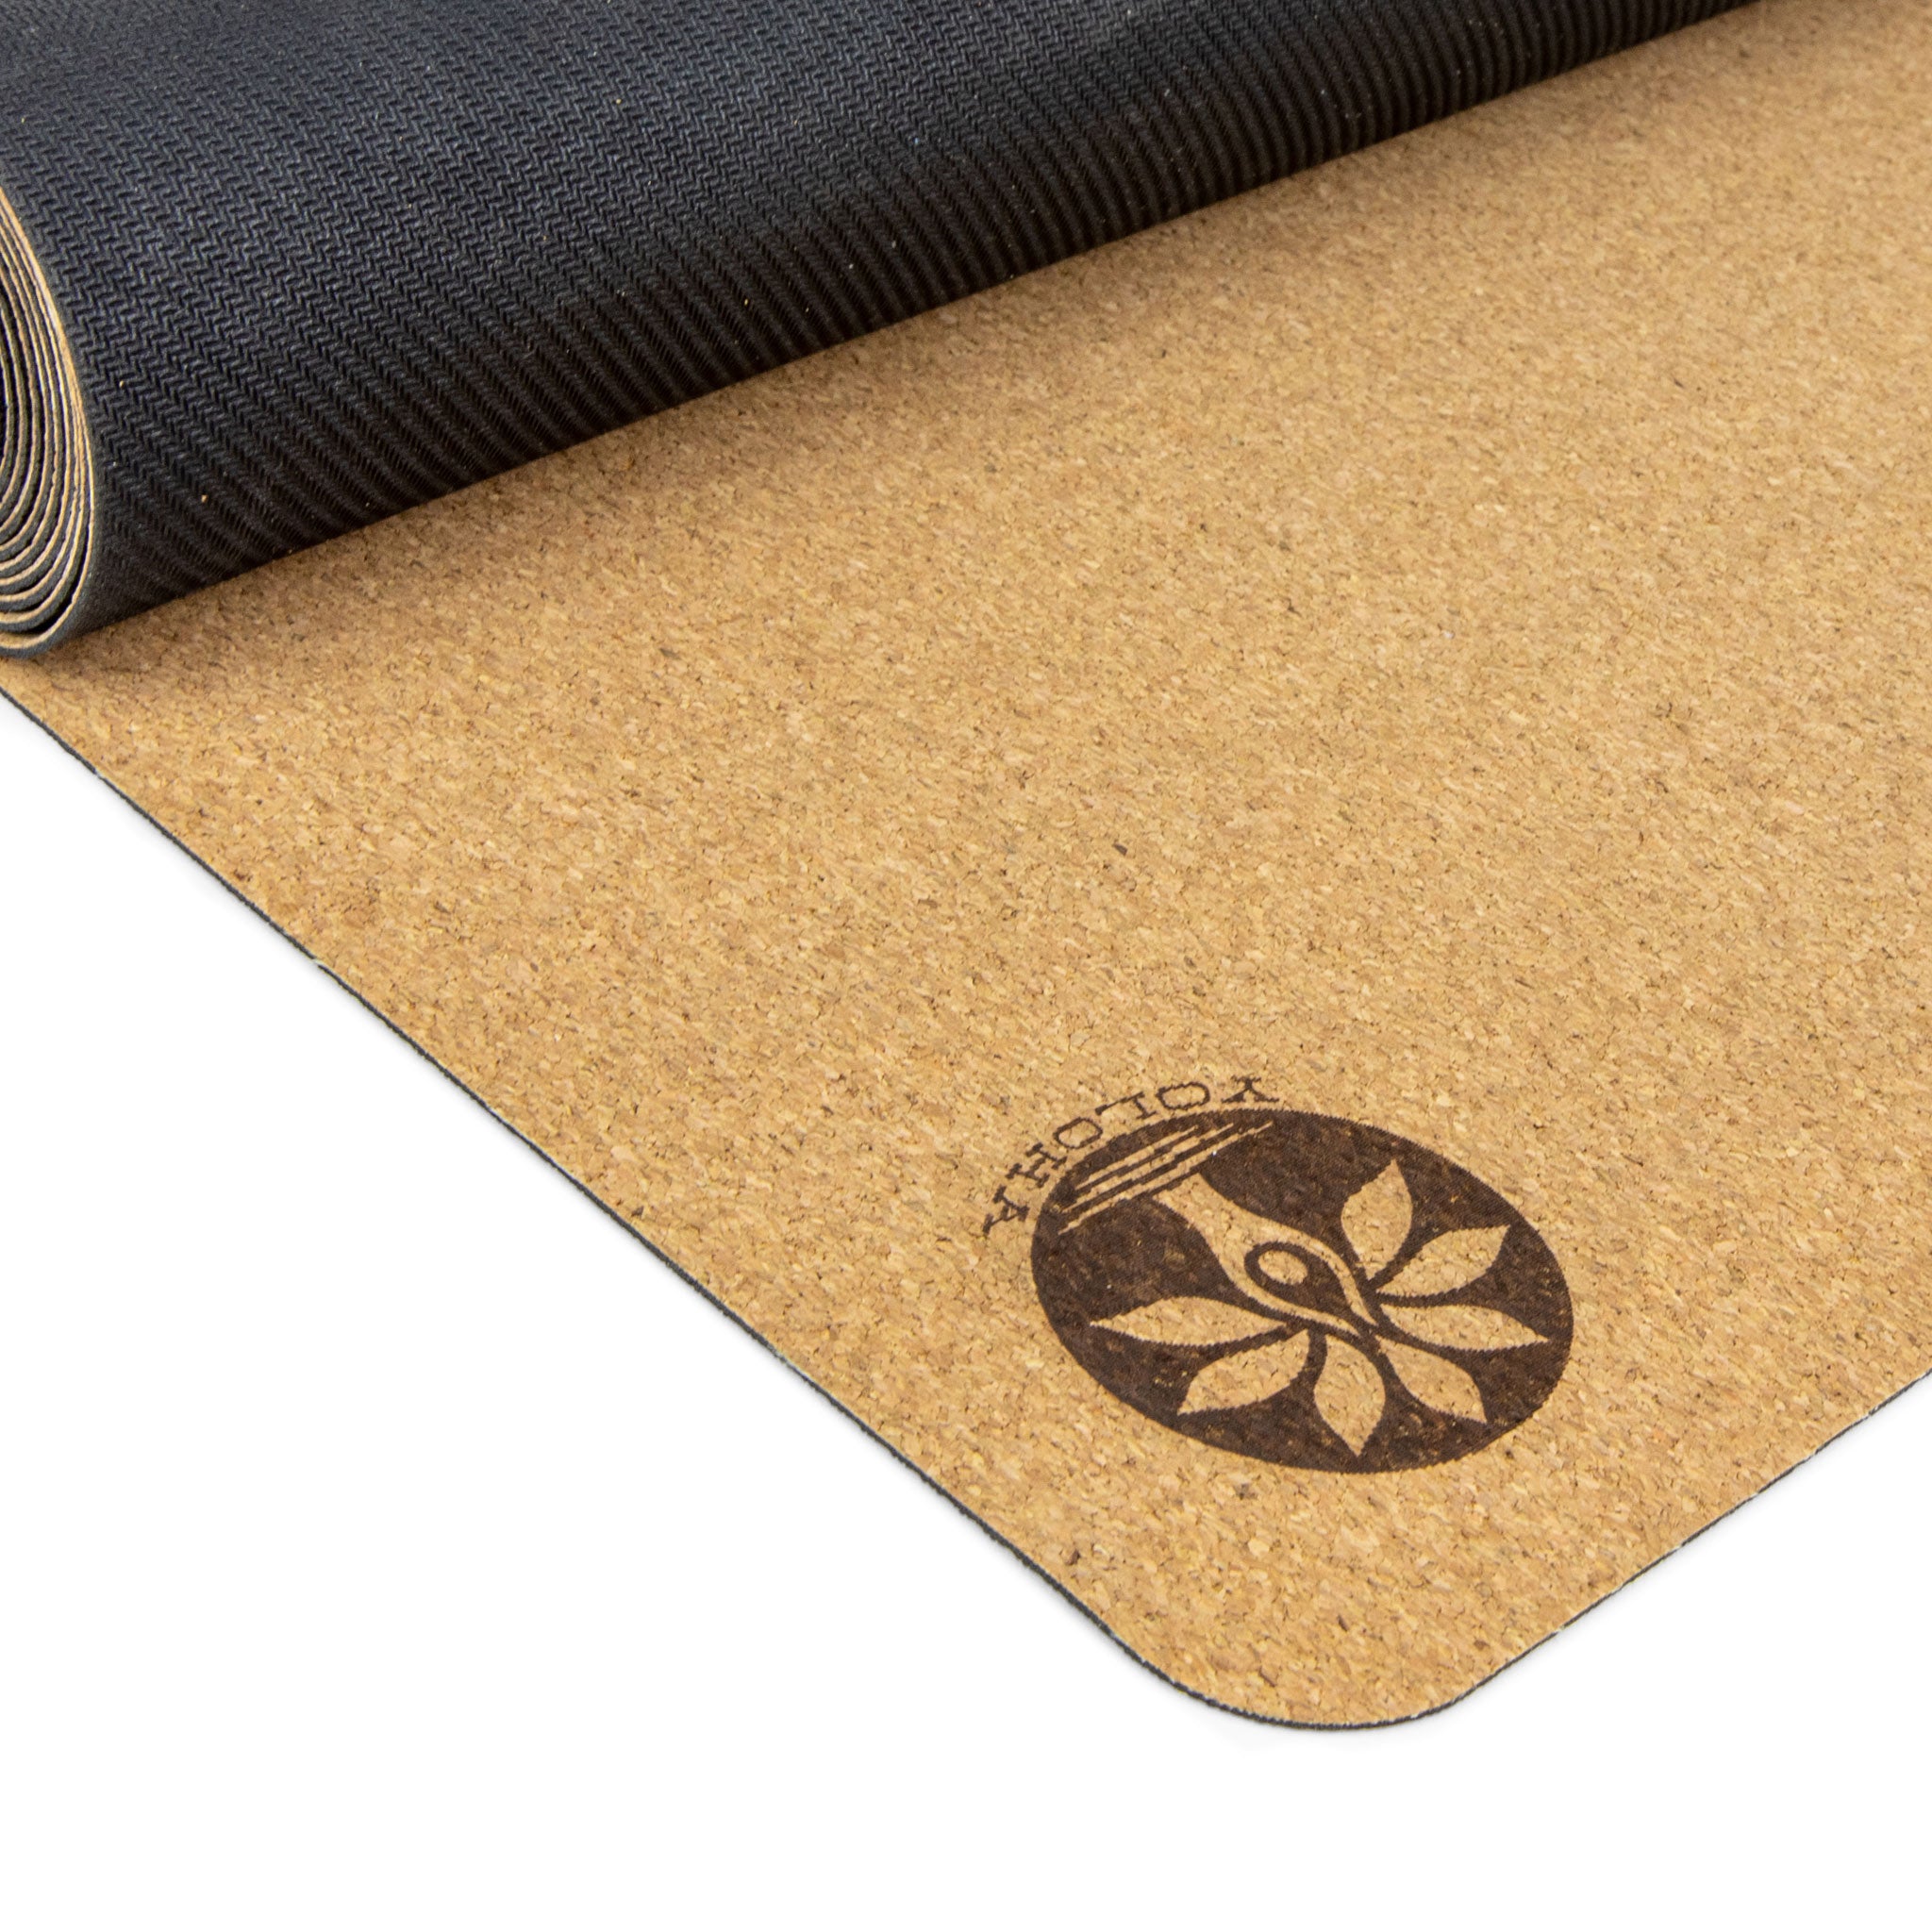 Lightweight Natural Yoga Mat for Travel, Workout, and Easy Storage